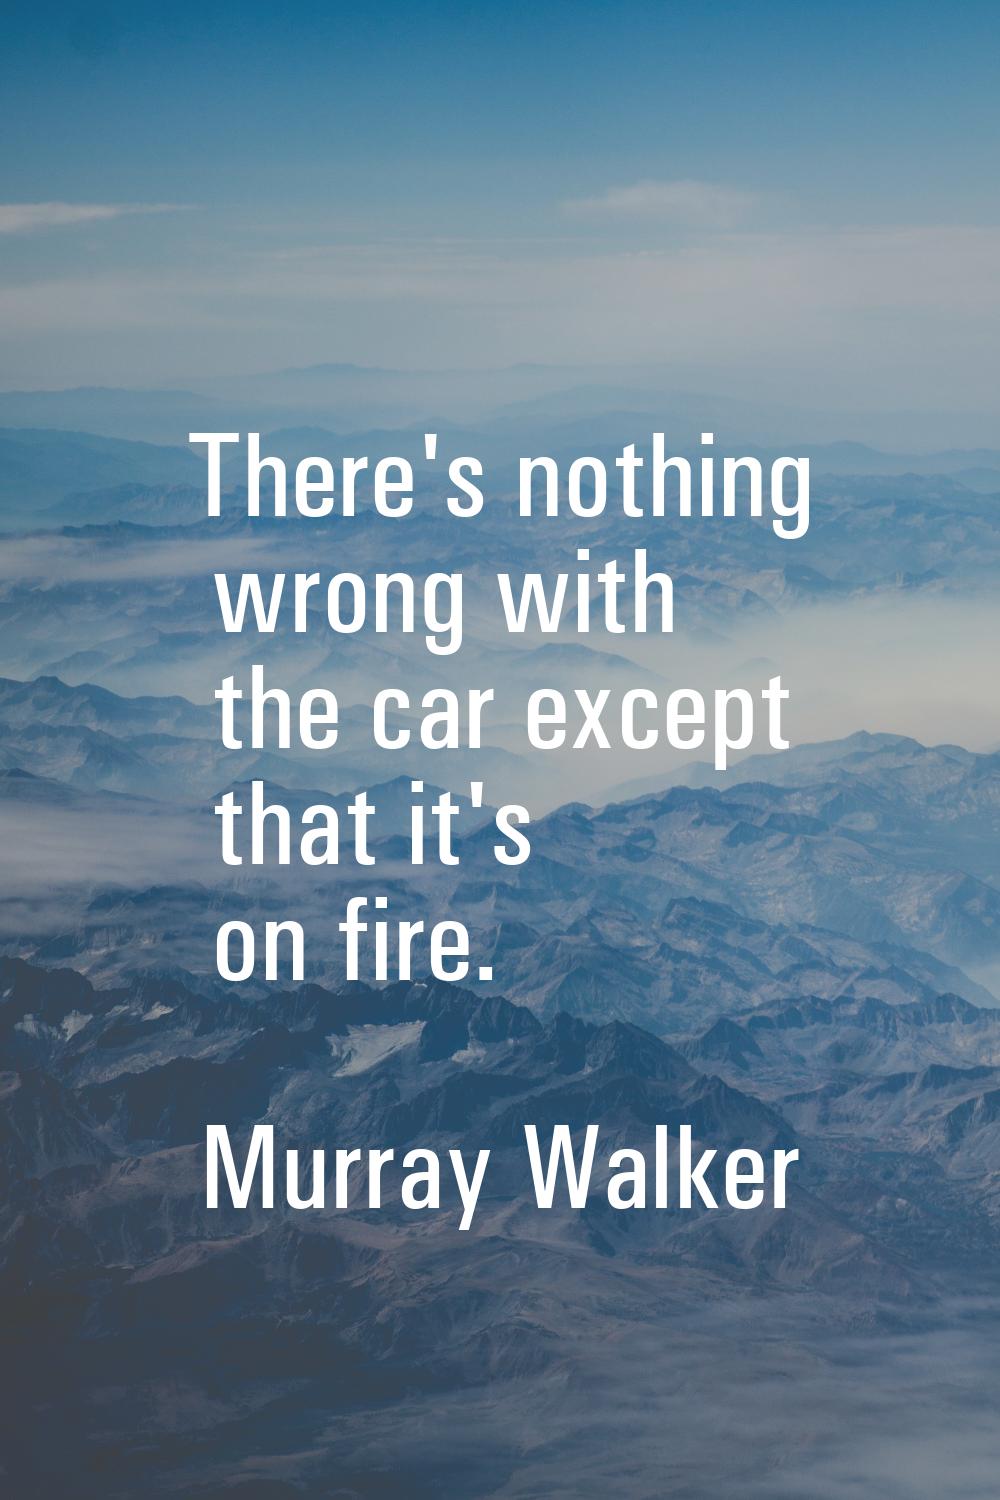 There's nothing wrong with the car except that it's on fire.